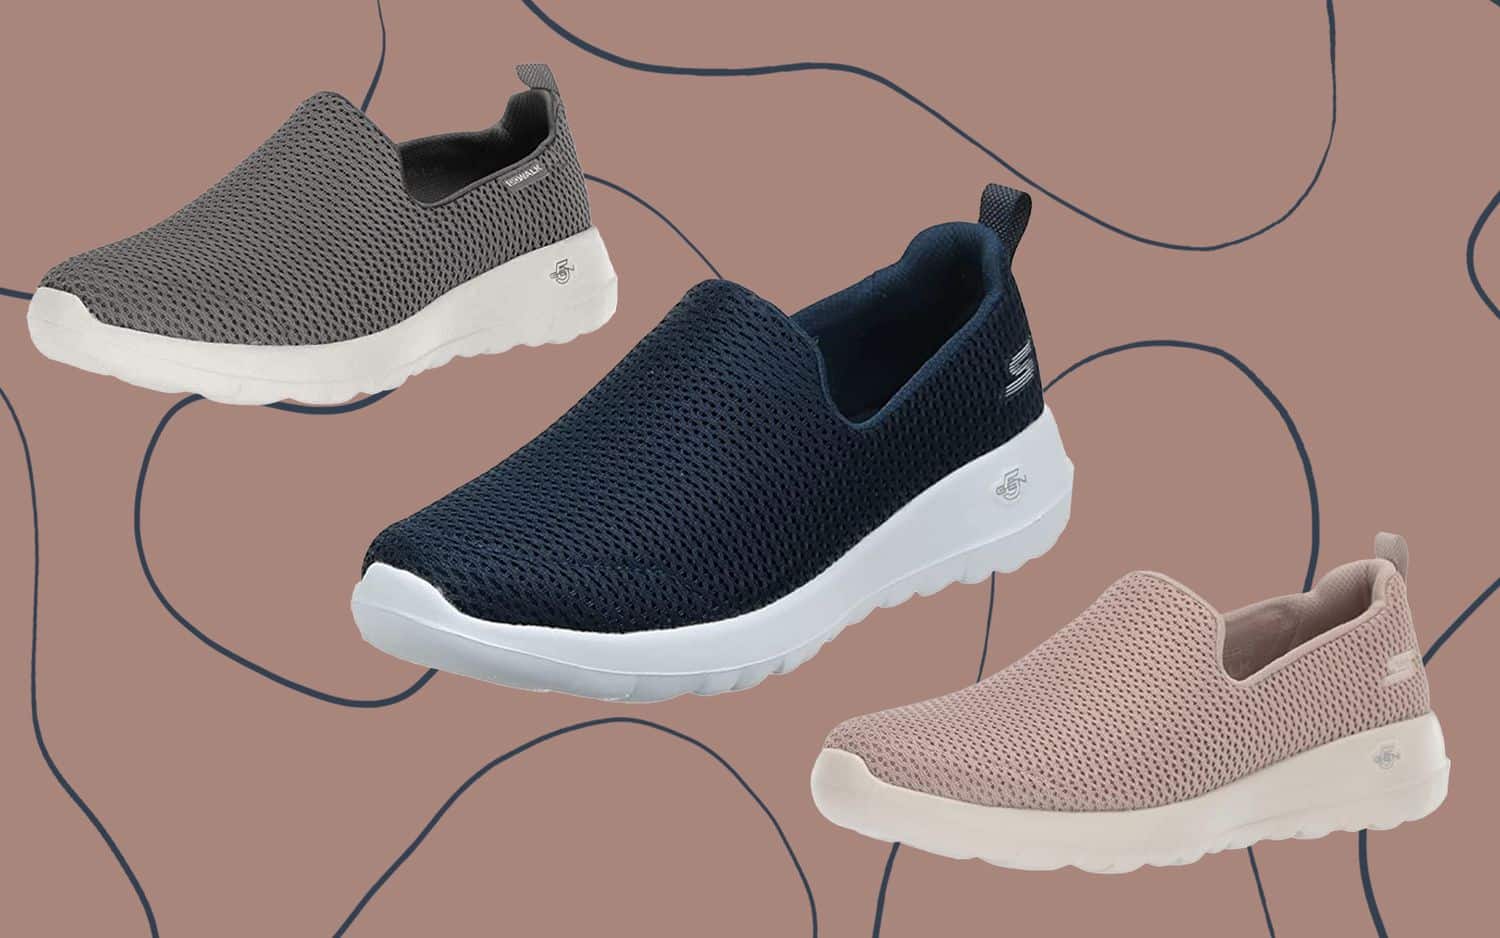 Are Skechers Go Walk Shoes Good For Walking?